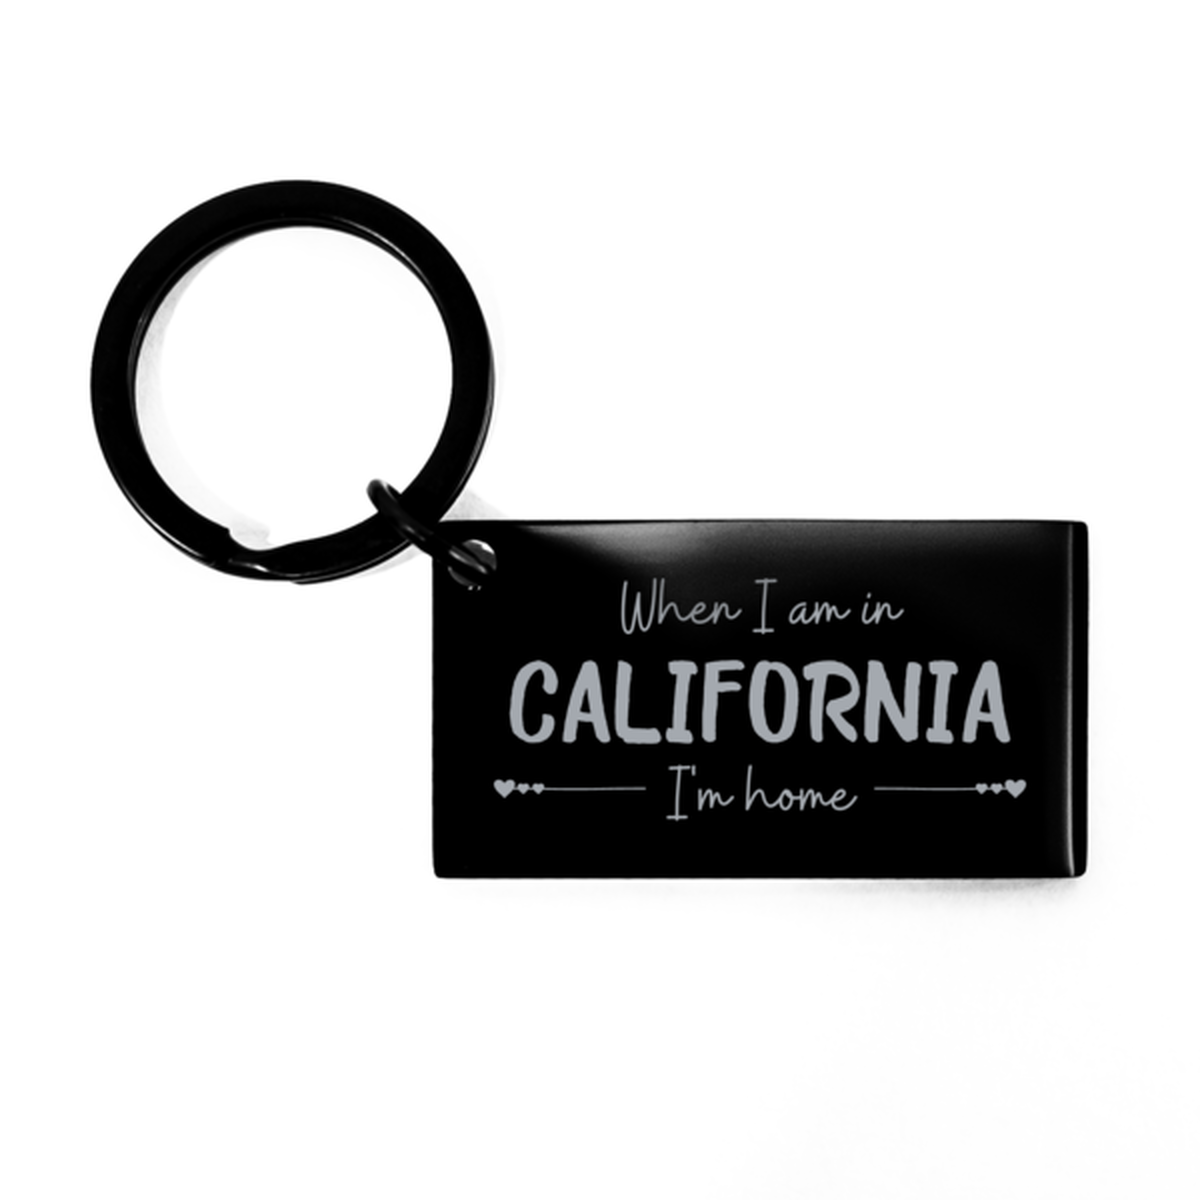 When I am in California I'm home Keychain, Cheap Gifts For California, State California Birthday Gifts for Friends Coworker